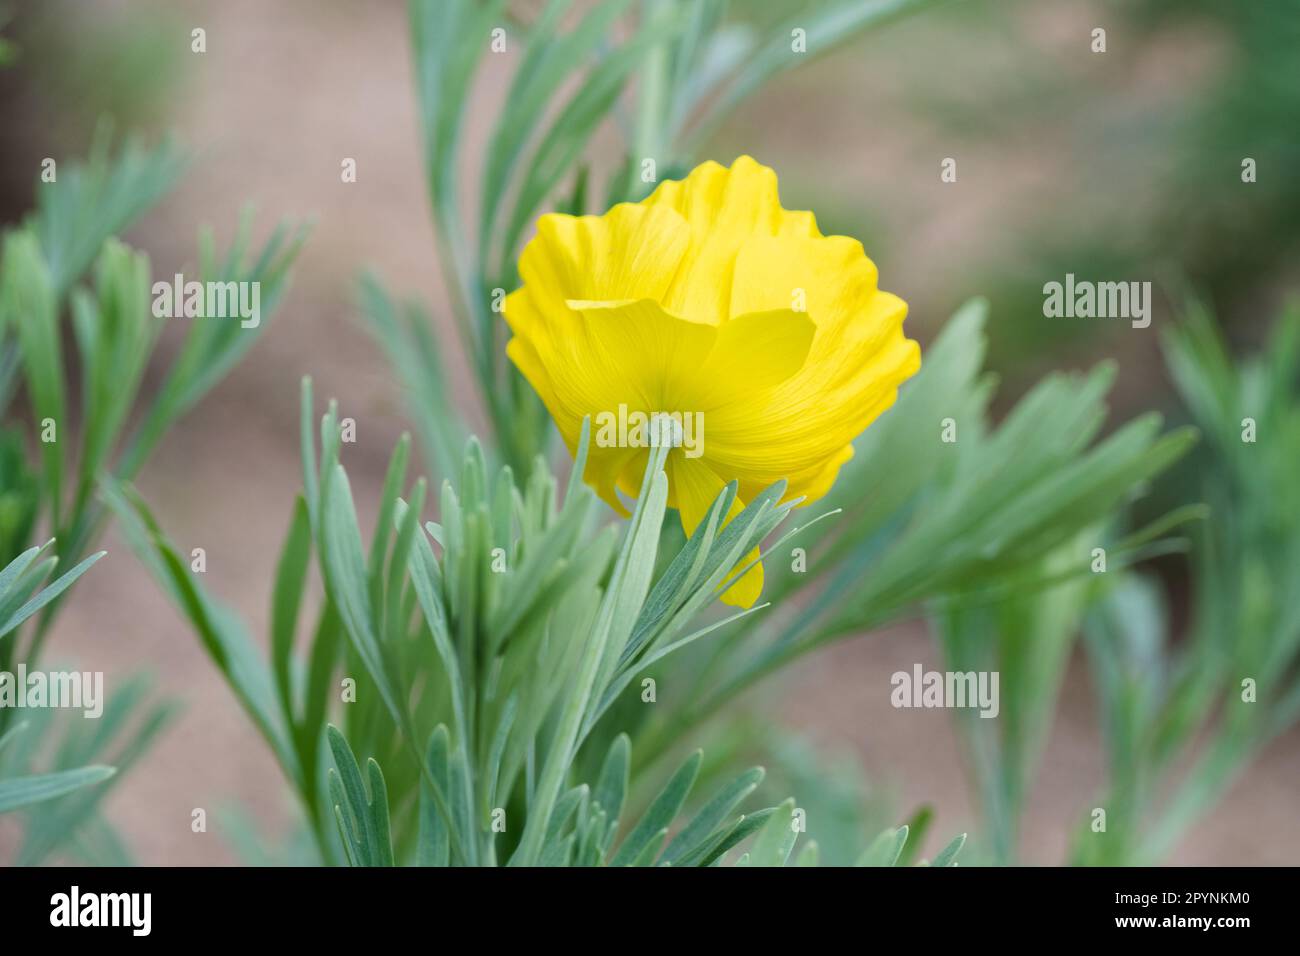 The Mexican tulip poppy is a dainty flower with lacy foliage and a fragile appearance. Stock Photo